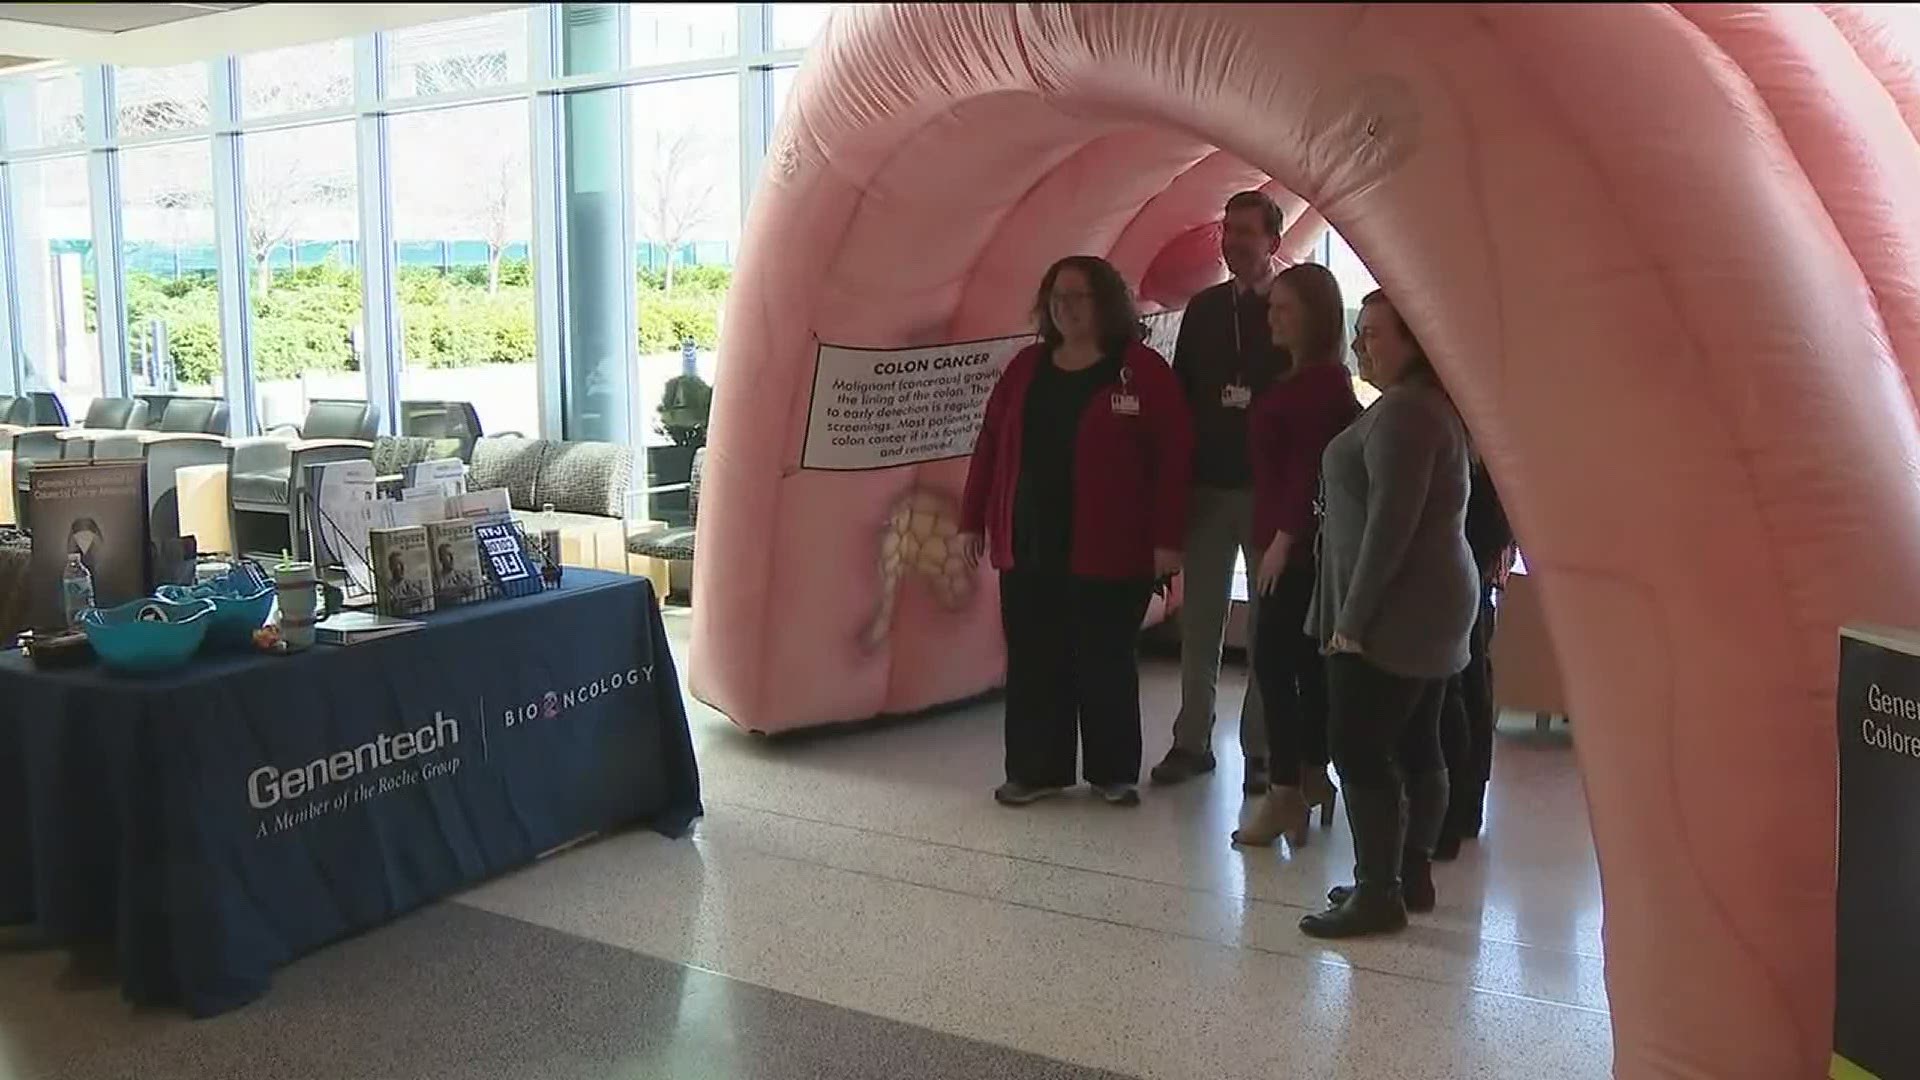 March is Colon Cancer Awareness month and Geisinger is encouraging people to get colonoscopies.